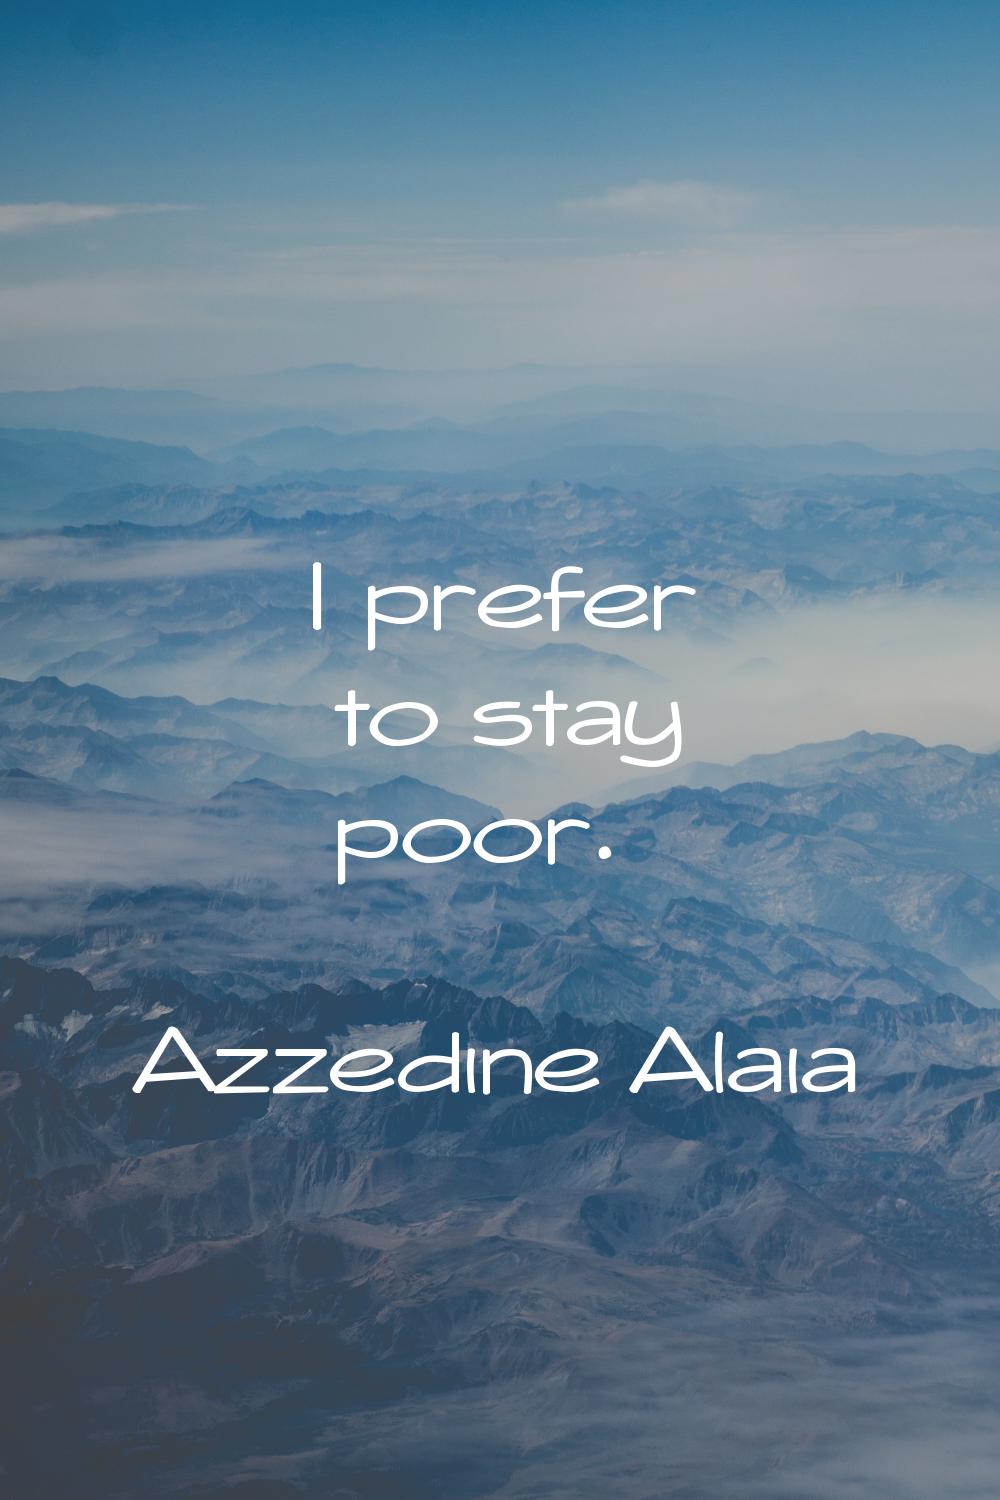 I prefer to stay poor.